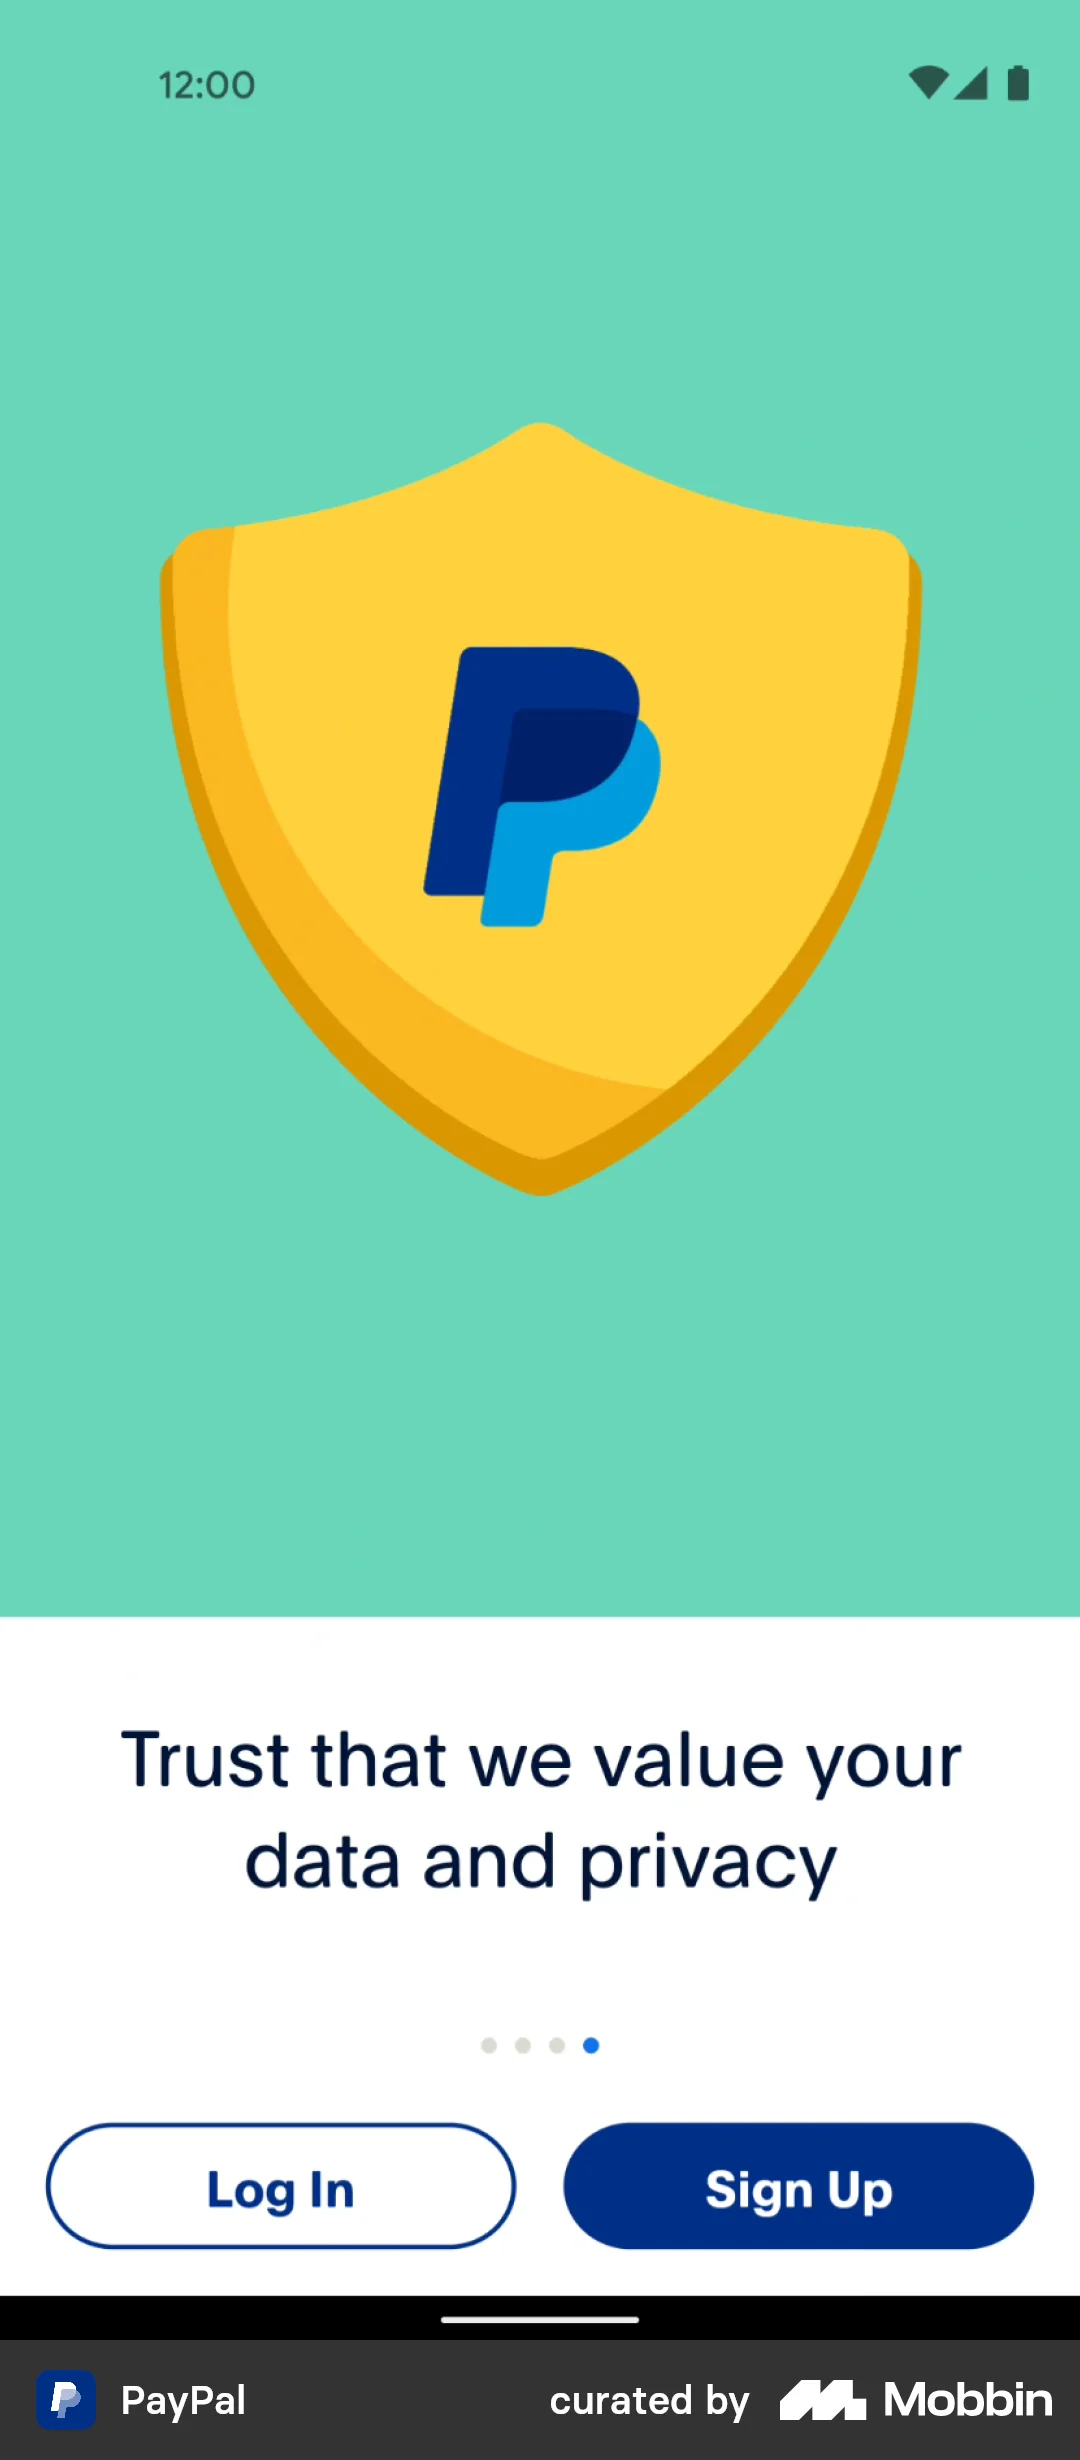 PayPal Onboarding screen